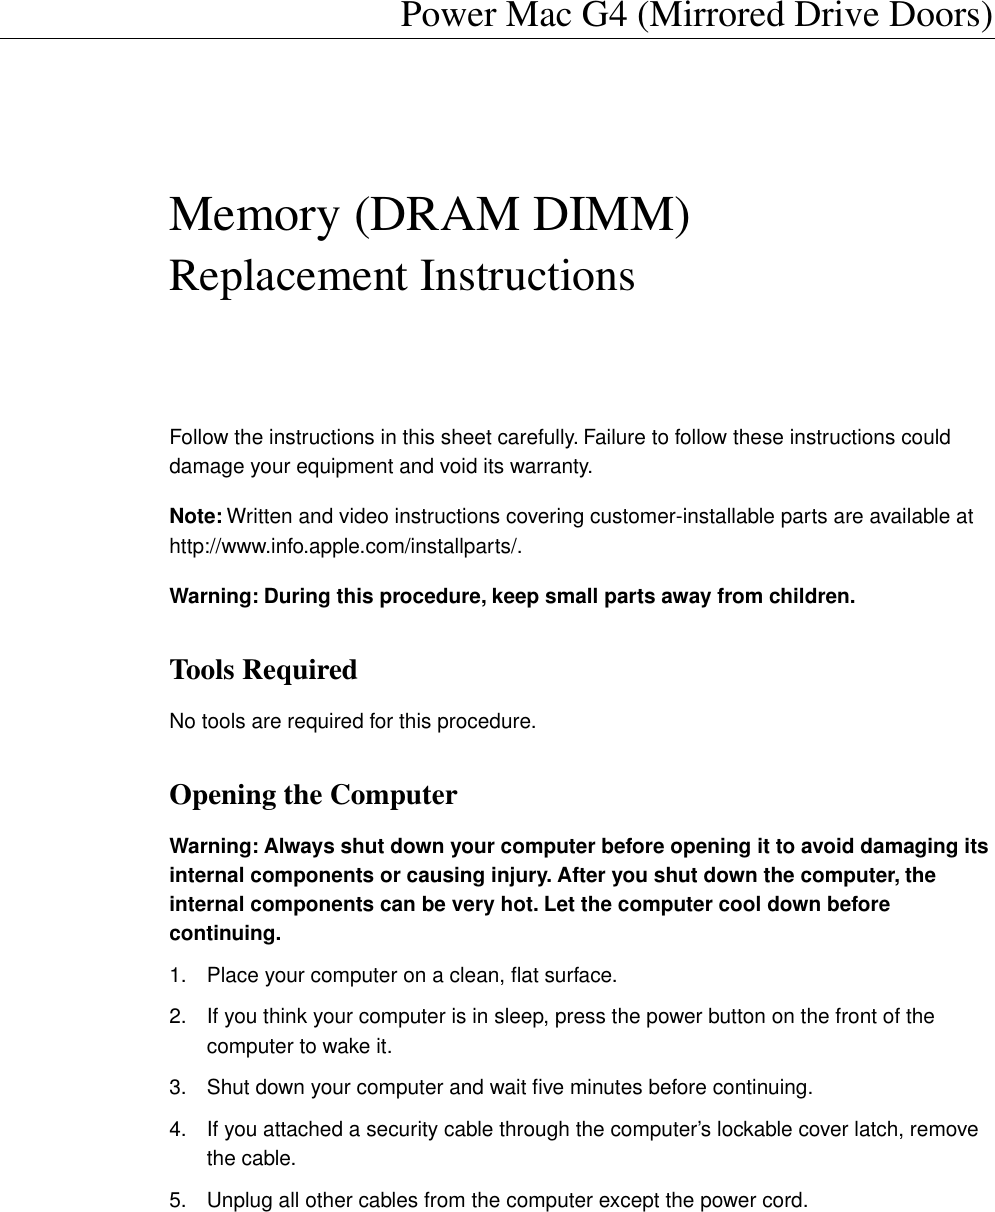 Page 1 of 4 - Apple Power Mac G4 (QuickSilver 2002) User Manual (Mirrored Drive Doors) - Memory (DRAM DIMM) Replacement Instructions G4mdd-mem-inbox